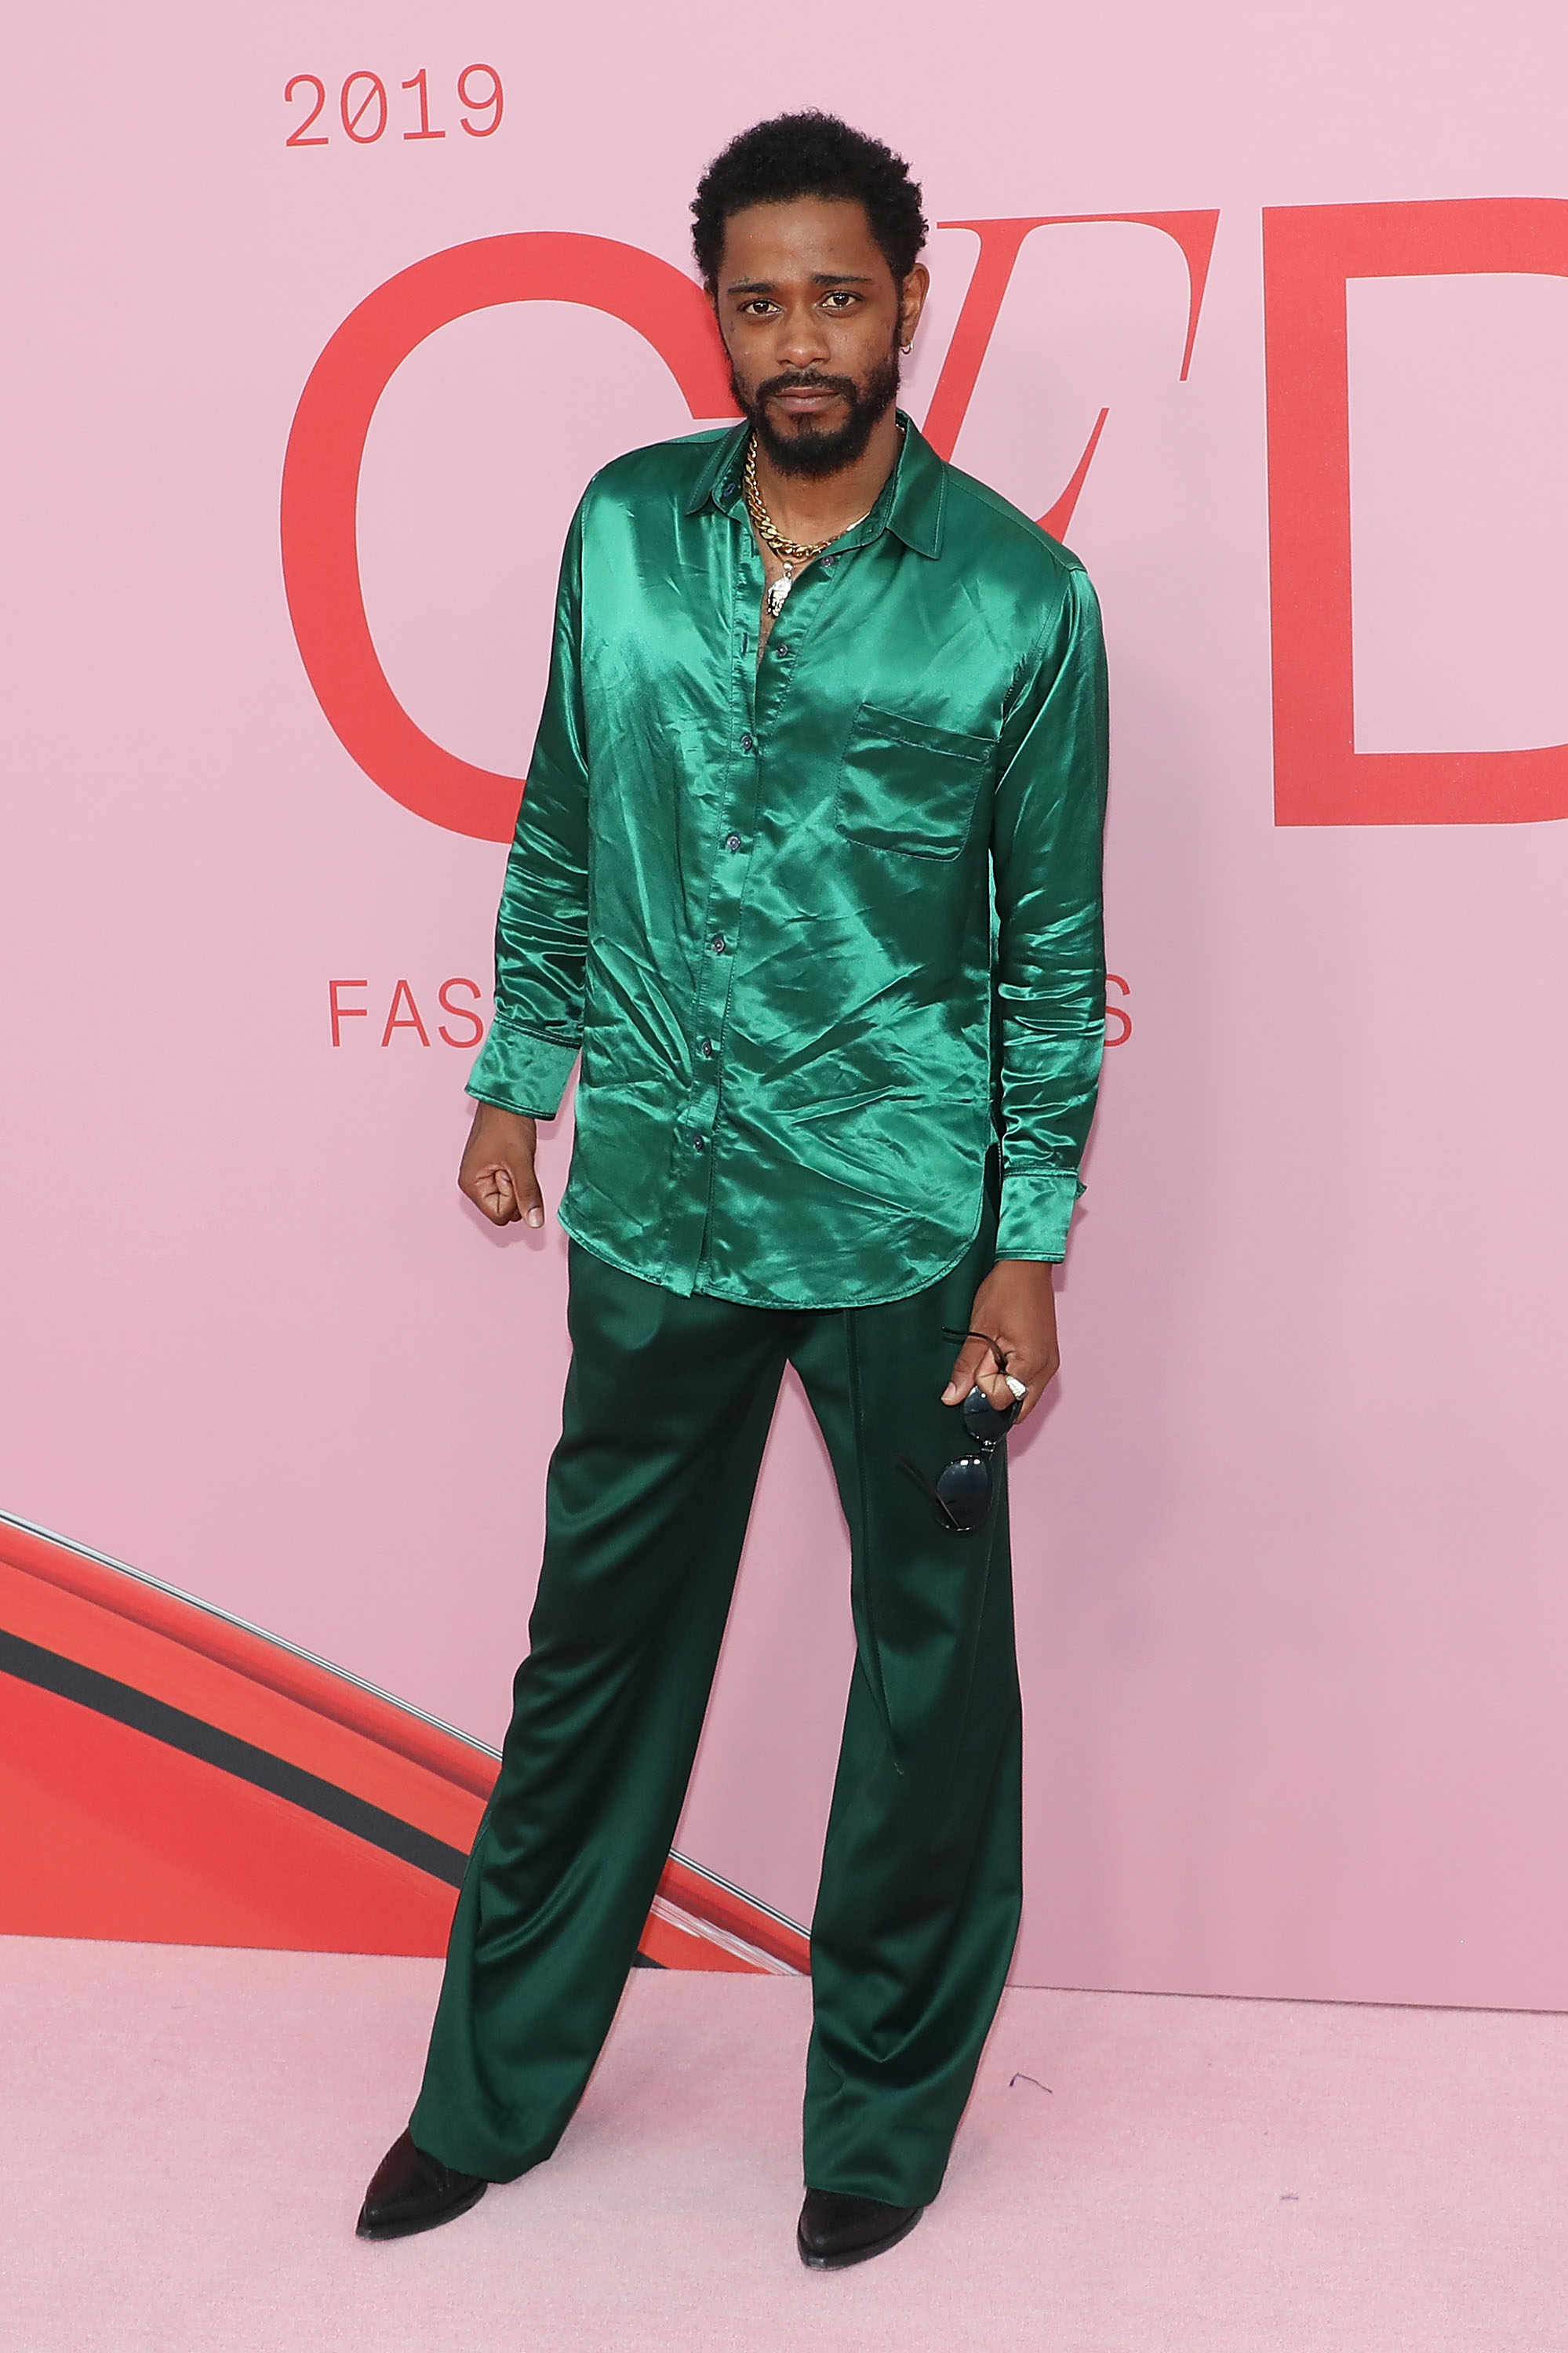 Virgil Abloh's Suit At The CFDA Fashion Awards Was A BitOff